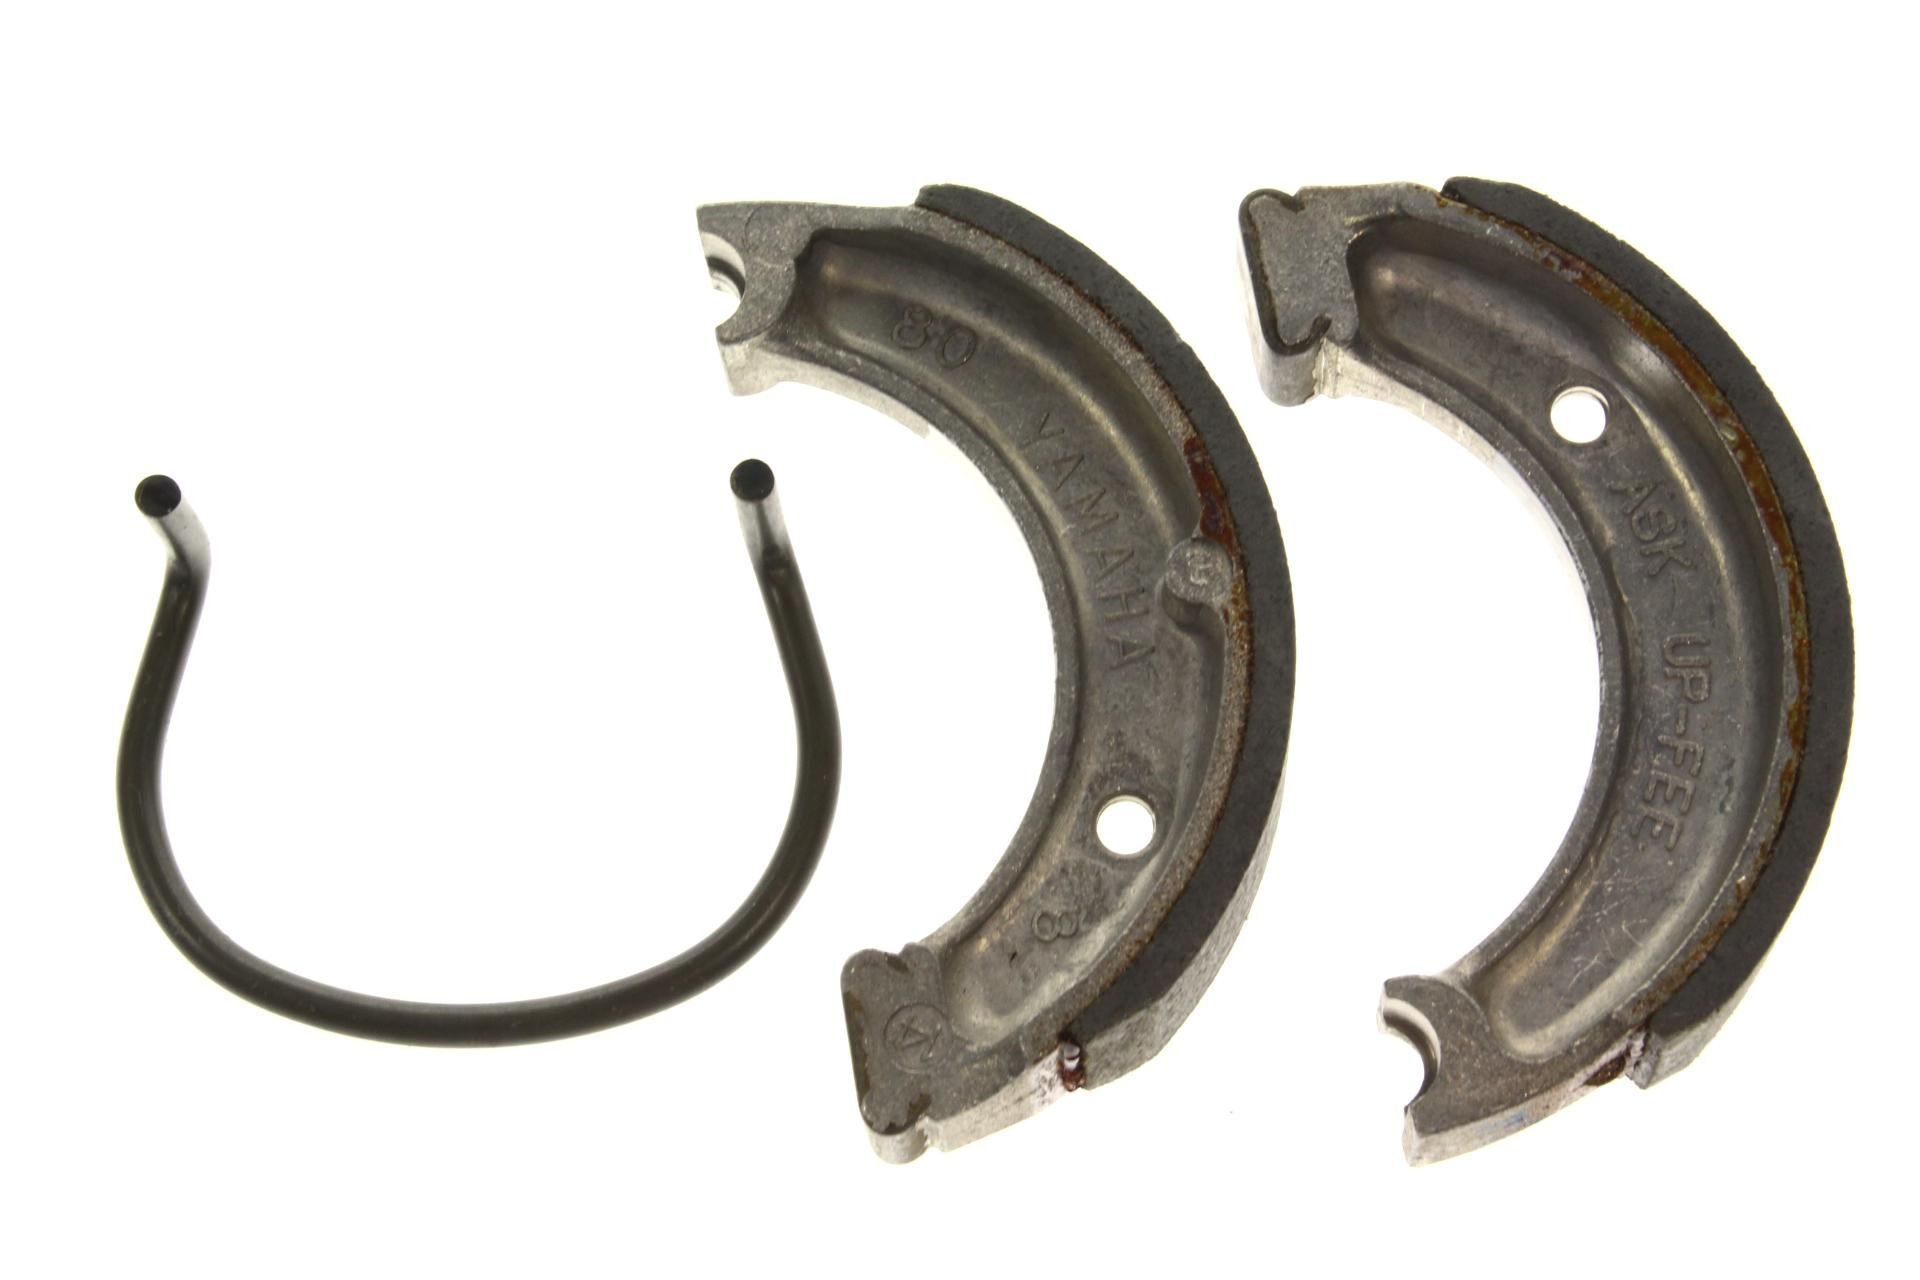 3PT-W2535-10-00 Superseded by 3PT-W253A-10-00 - BRAKE SHOE KIT